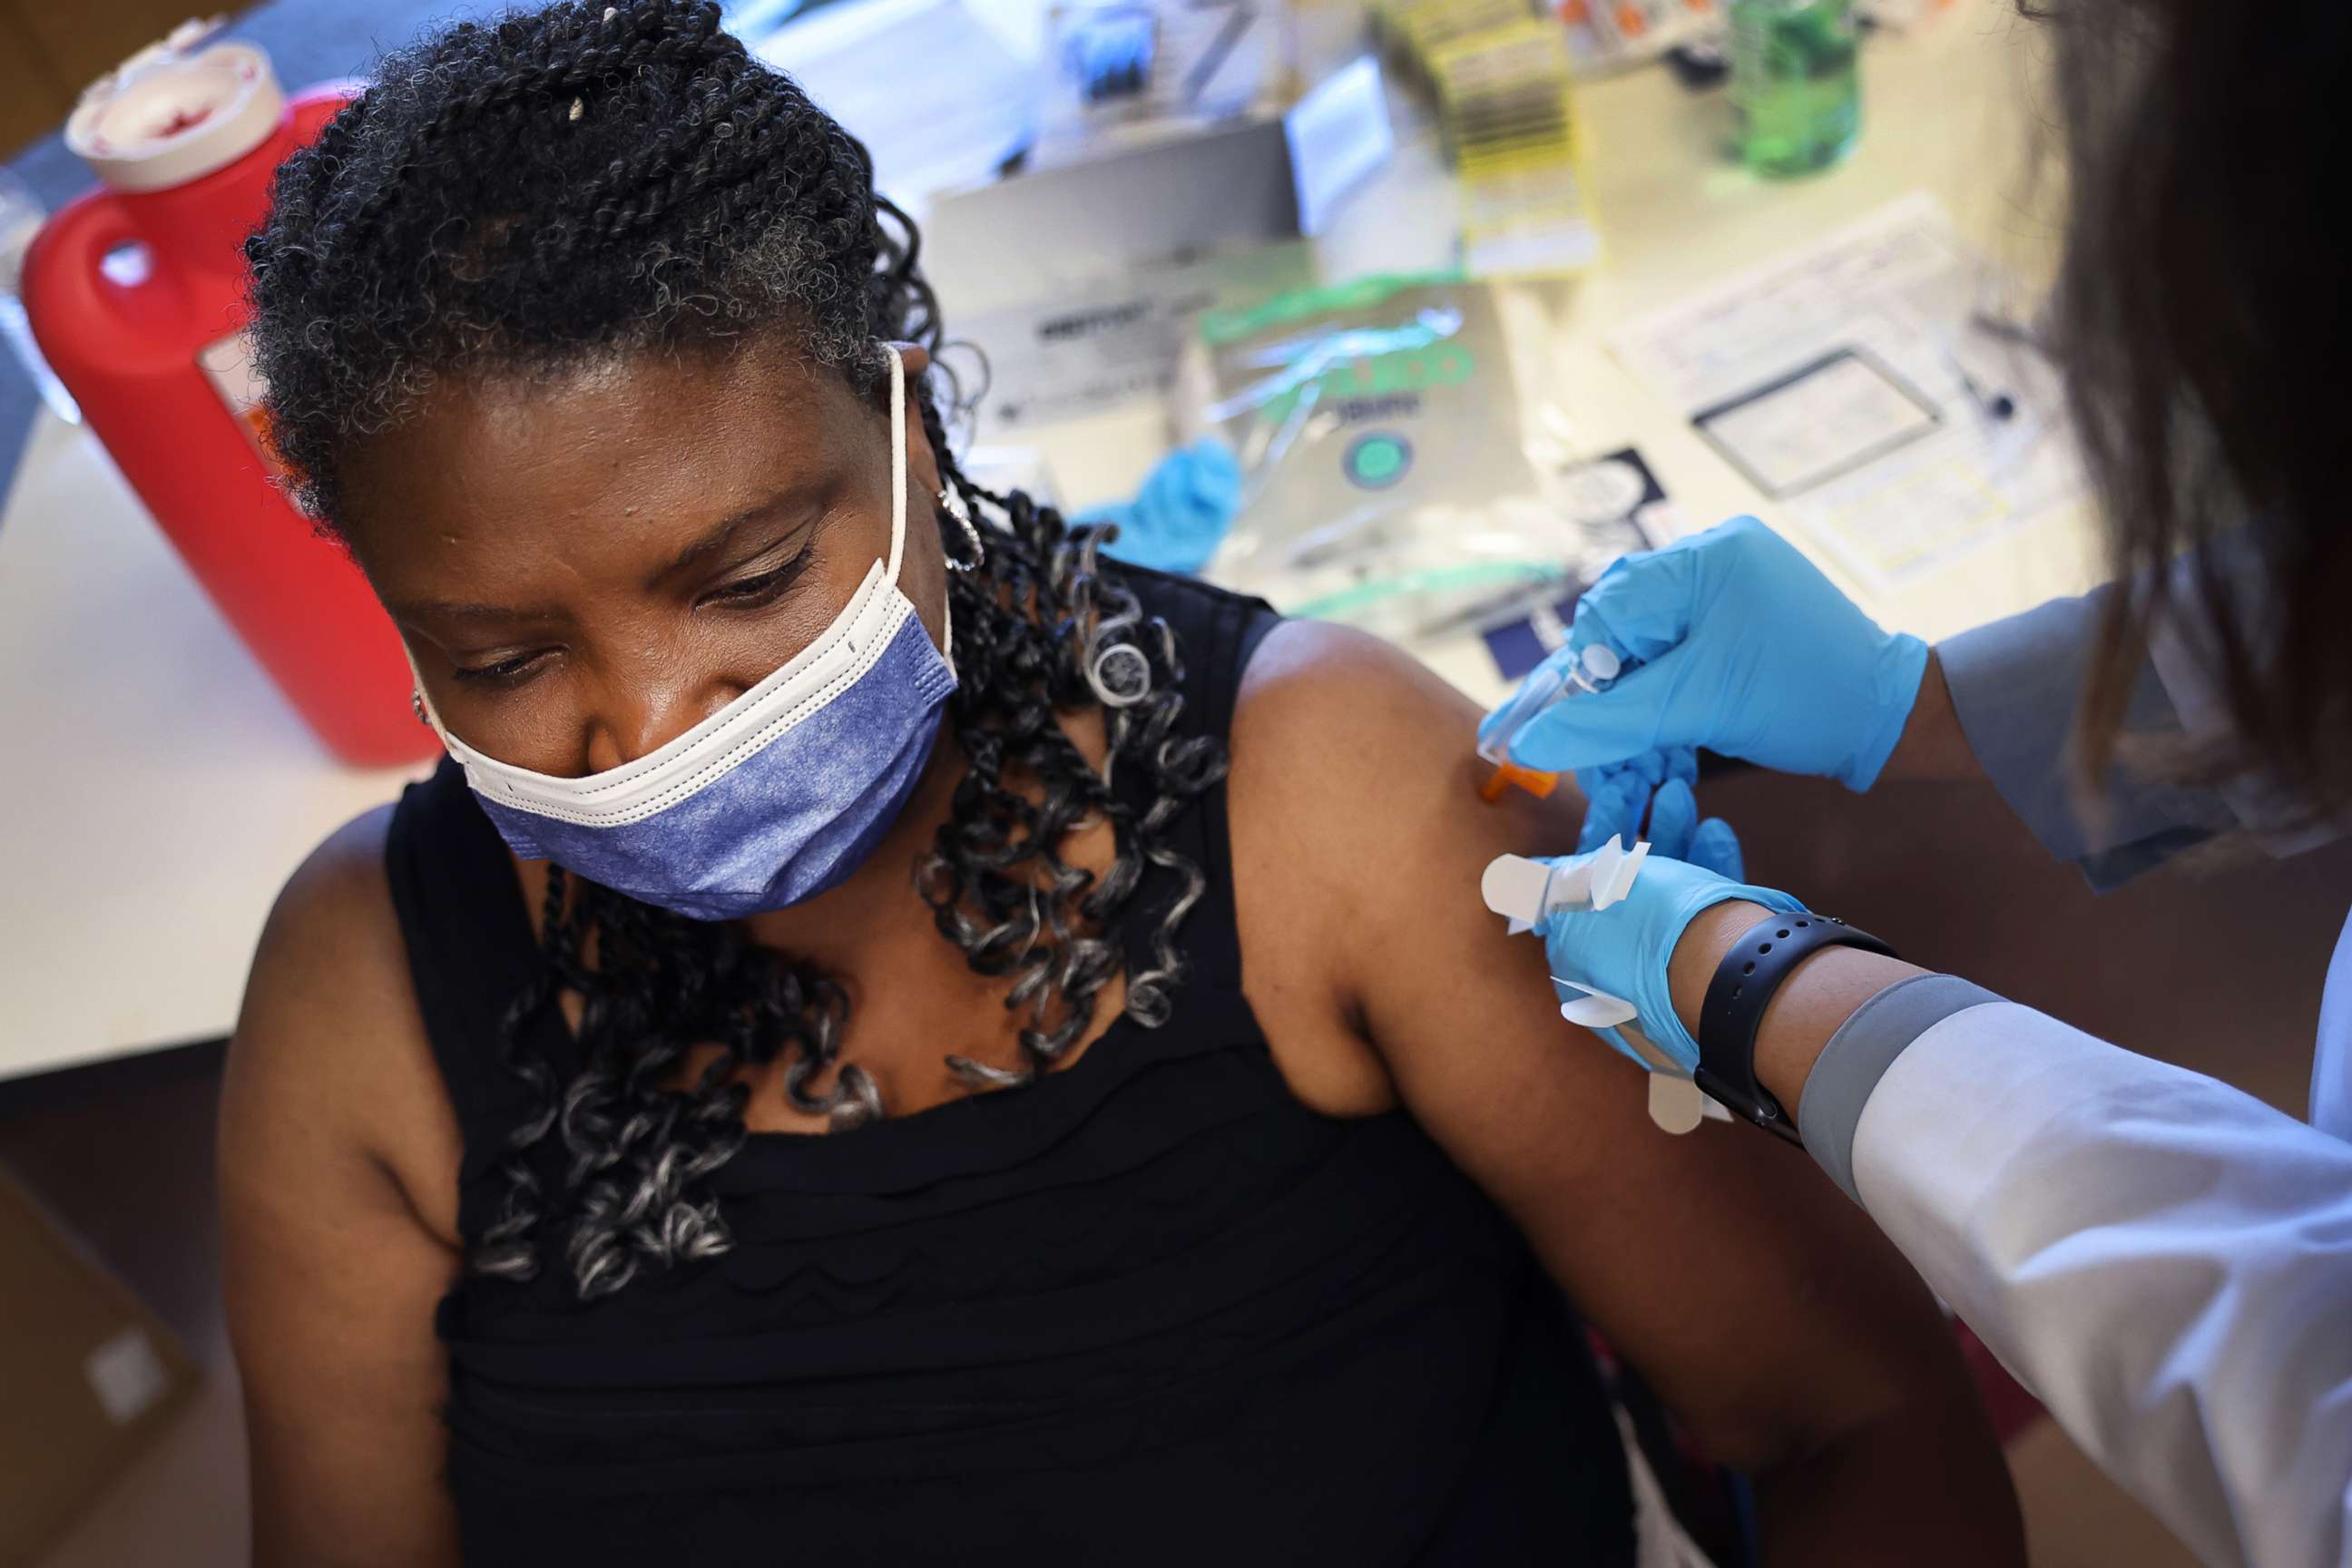 PHOTO: In this Sept. 9, 2022, file photo, a woman gets a flu vaccine during an event hosted by the Chicago Department of Public Health at the Southwest Senior Center in Chicago.